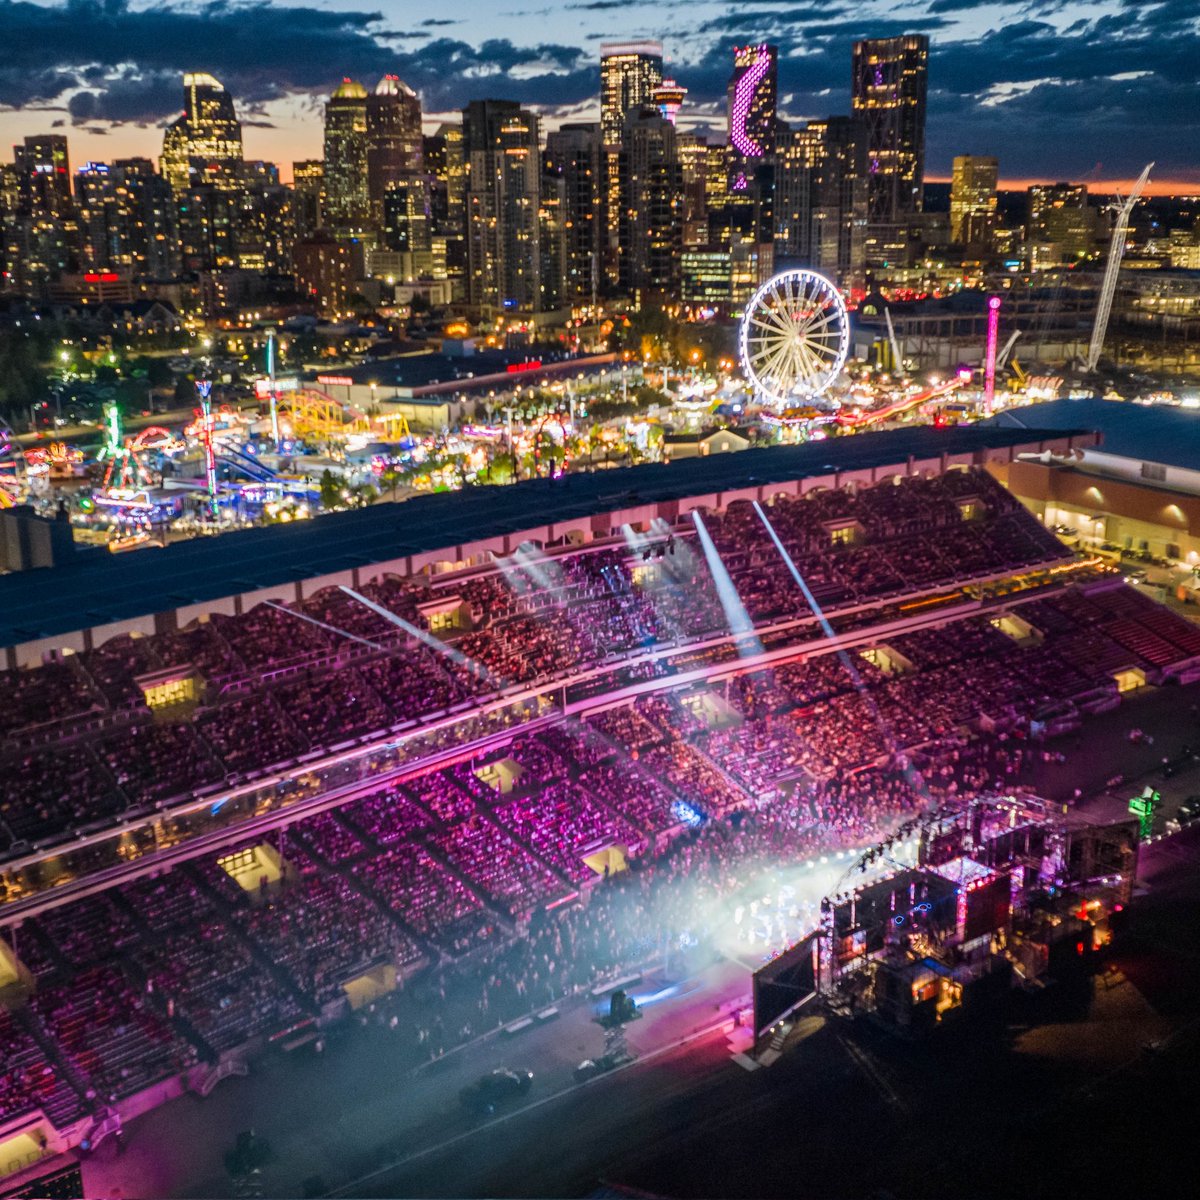 Haven't seen crowds like this in years!! Live streaming this incredible backdrop with my drones all week, always love working with this amazing team! #stampede2022 #dronephotography #communityspirit #travelalberta #yycnow #yycevents